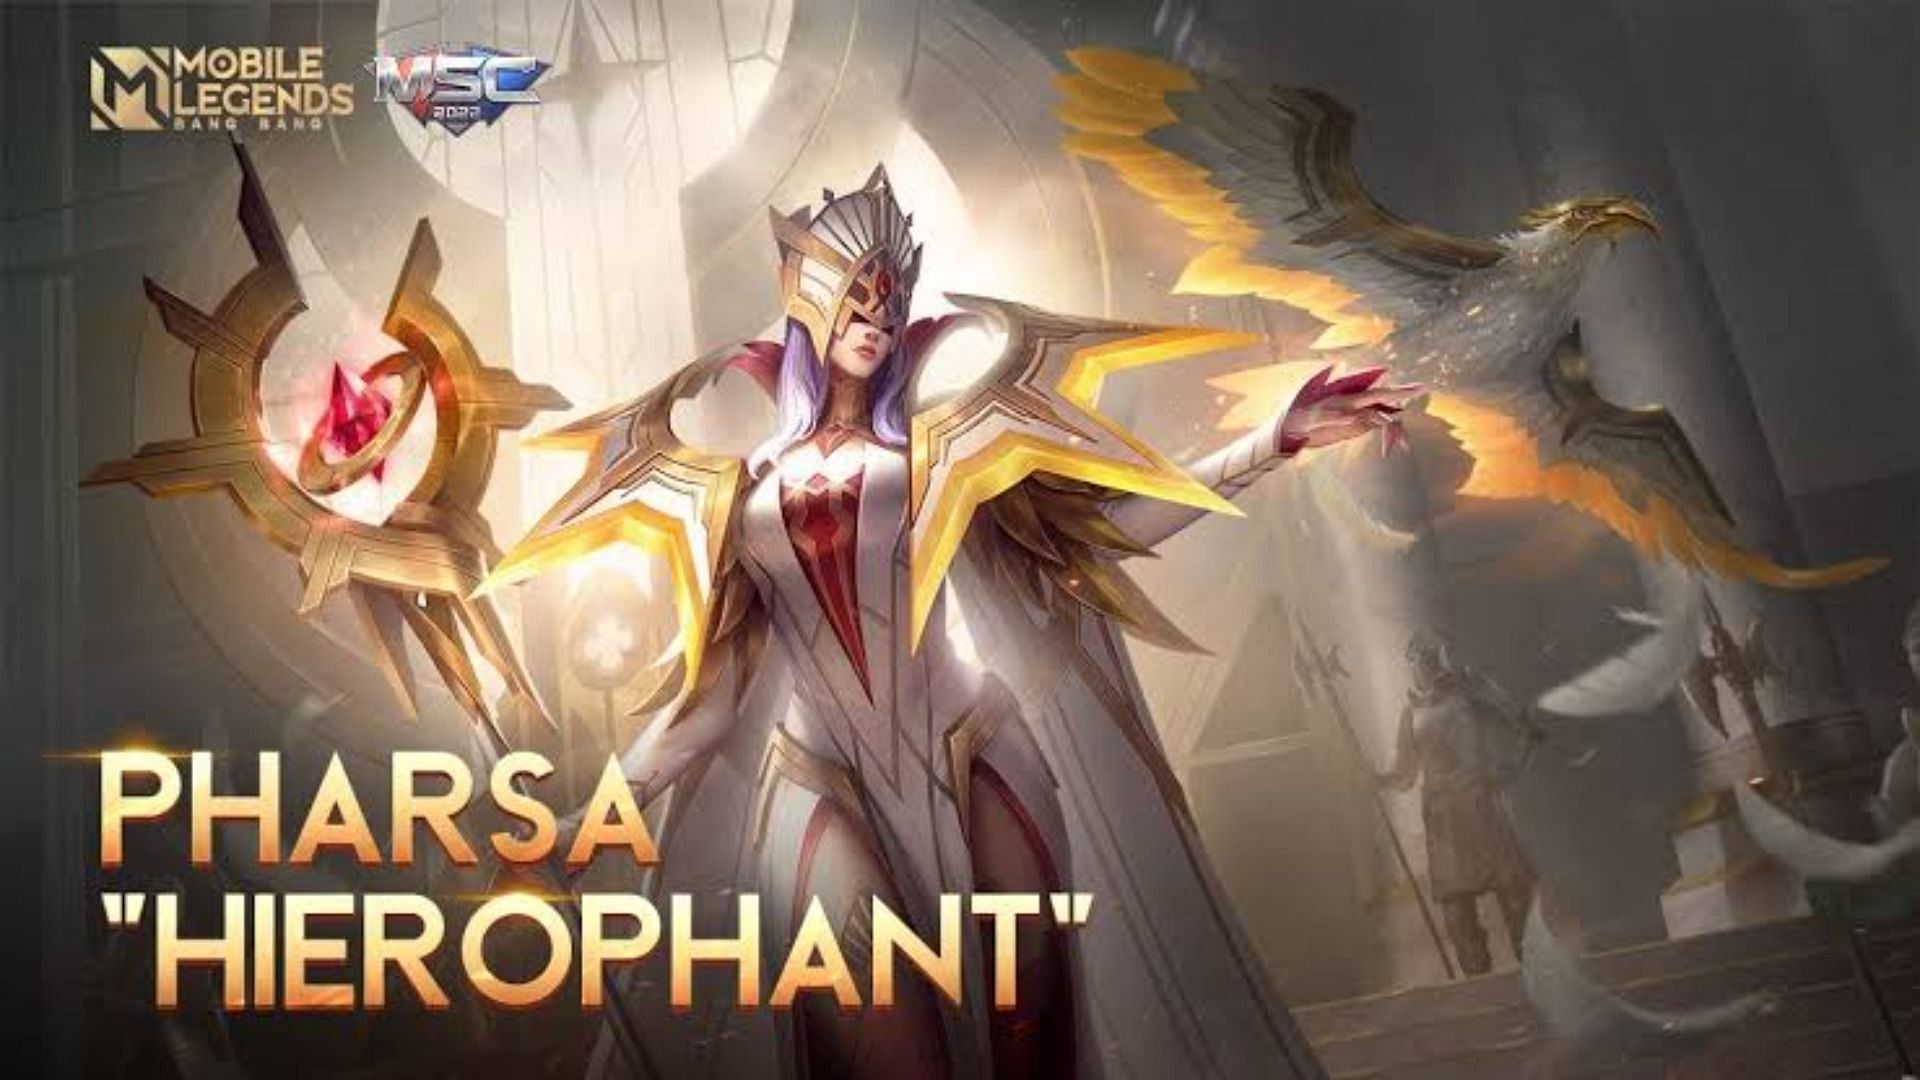 You can get Pharsa Hierophant Skin by opening the MSC Treasure Boxes (Image via Moonton Games)